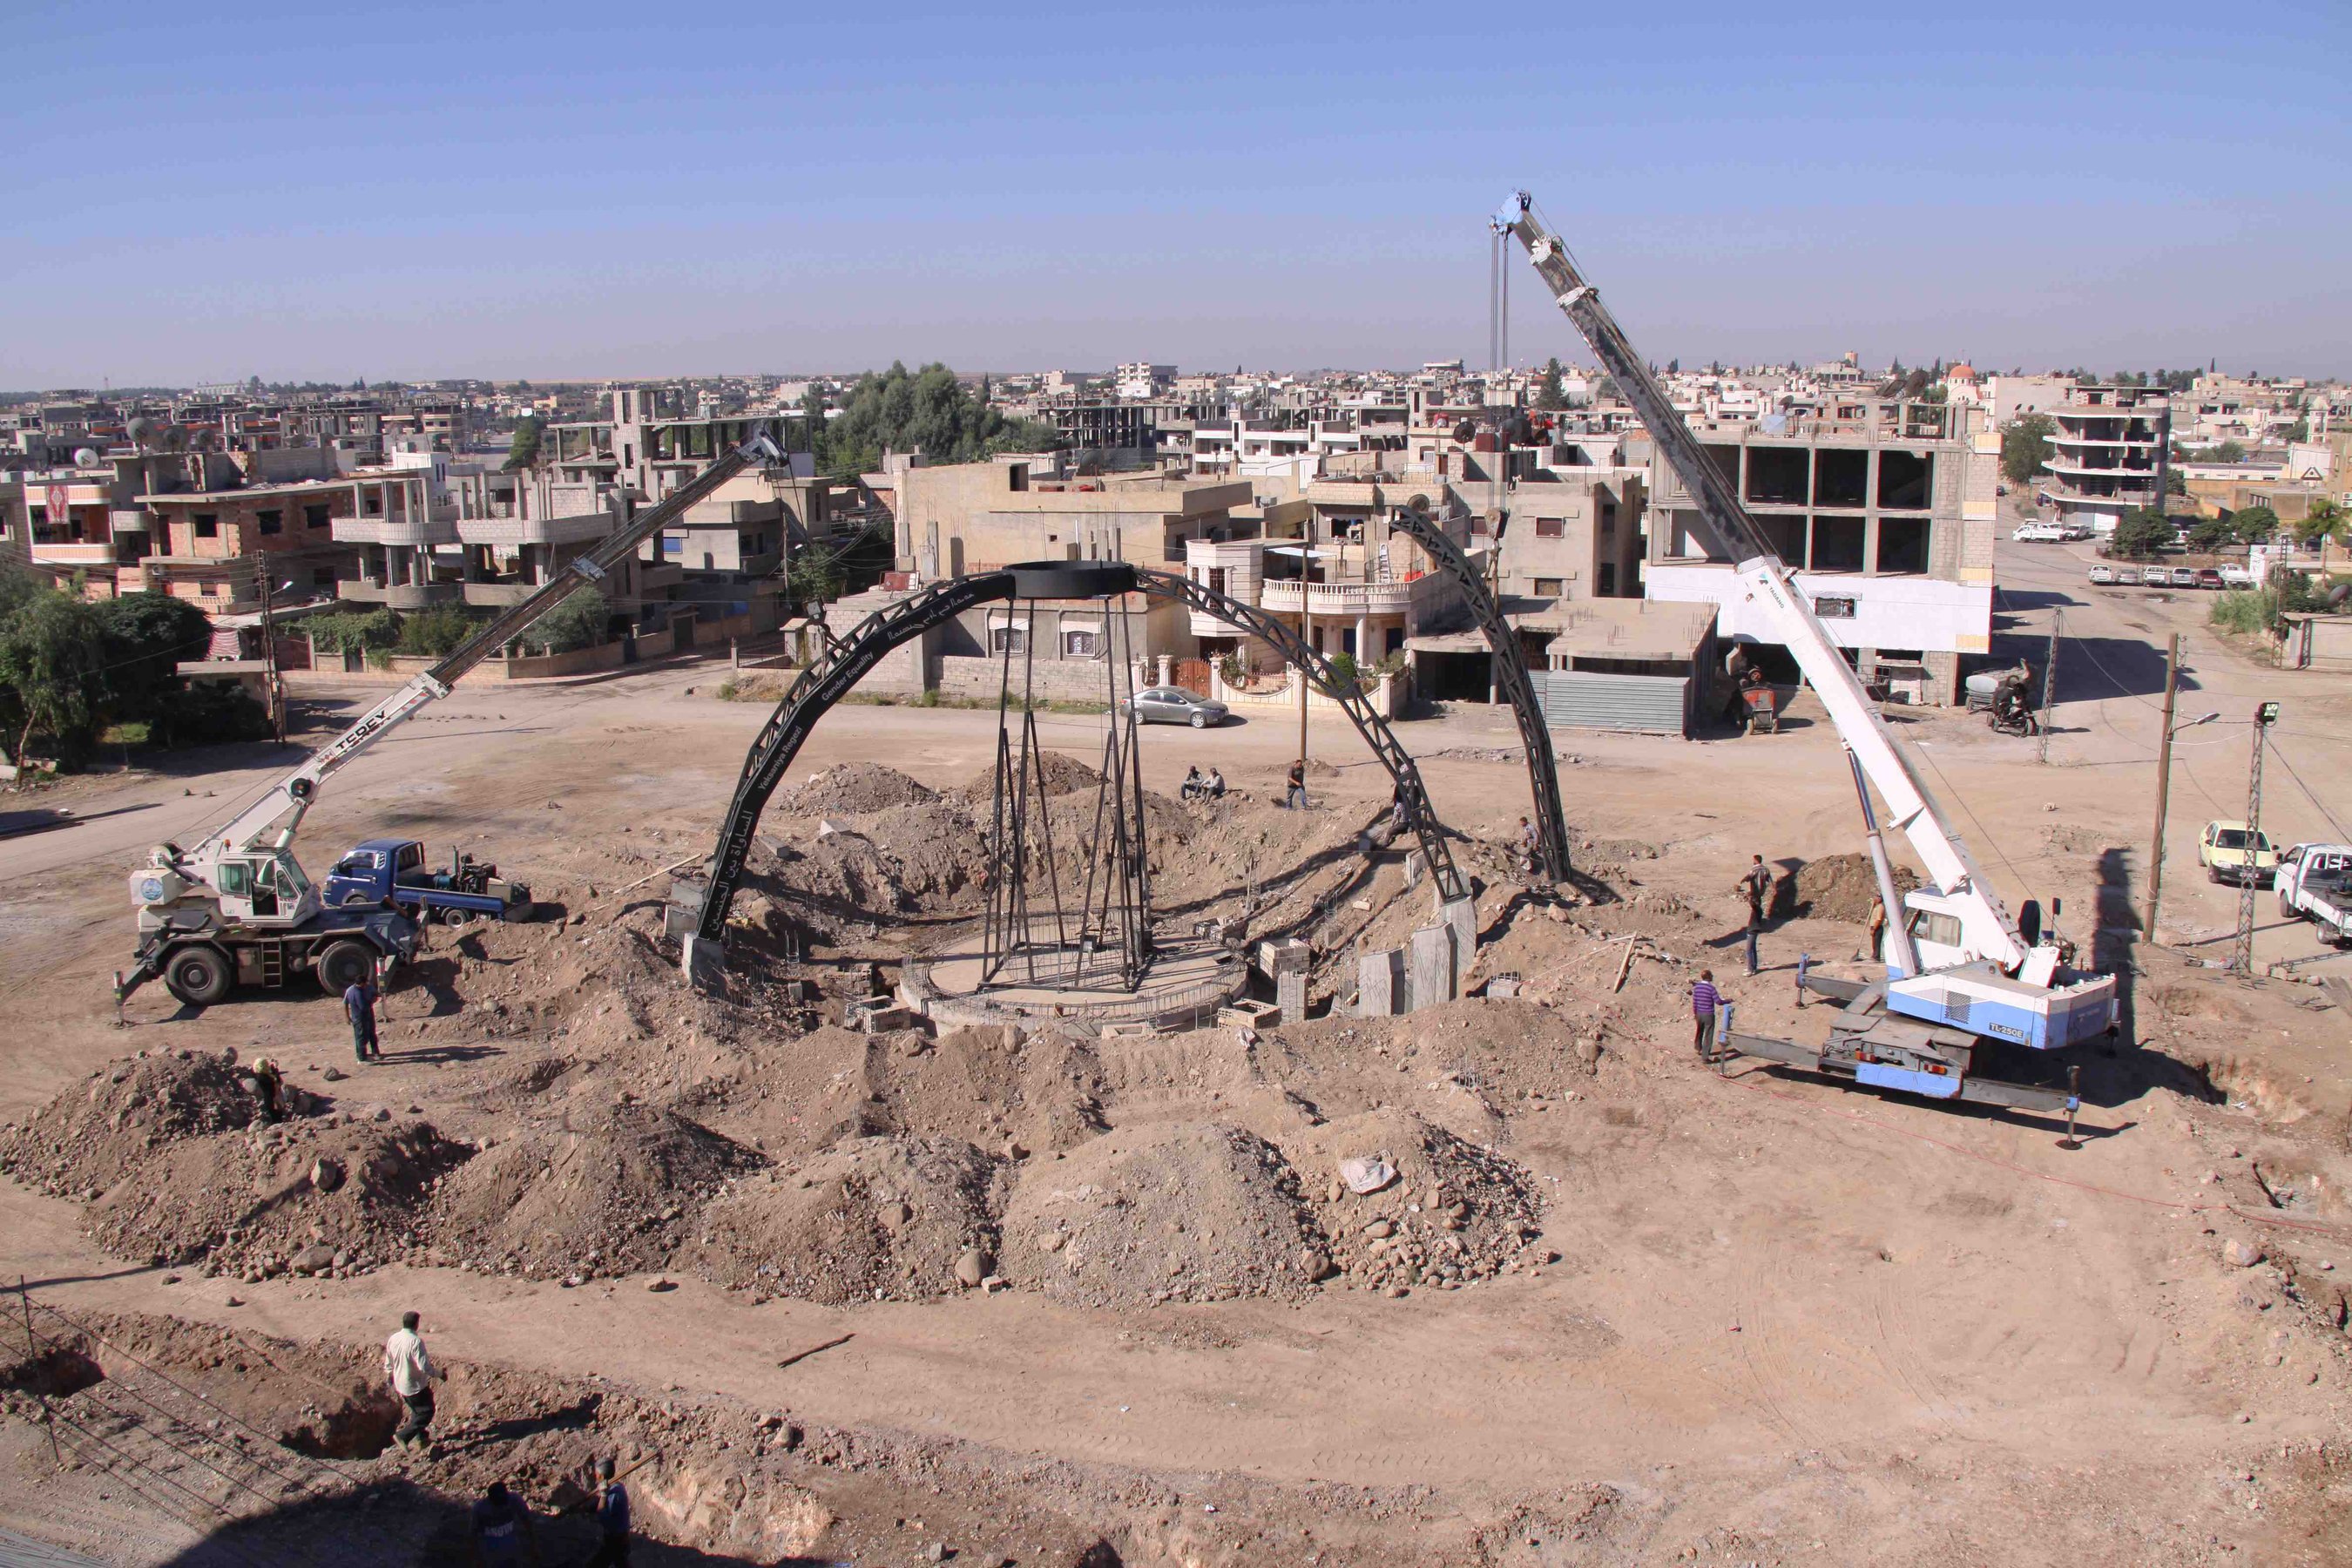 New World Summit, 2015/2016 (developed in collaboration with the Democratic Self-Administration of Rojava) - Construction of a public parliament